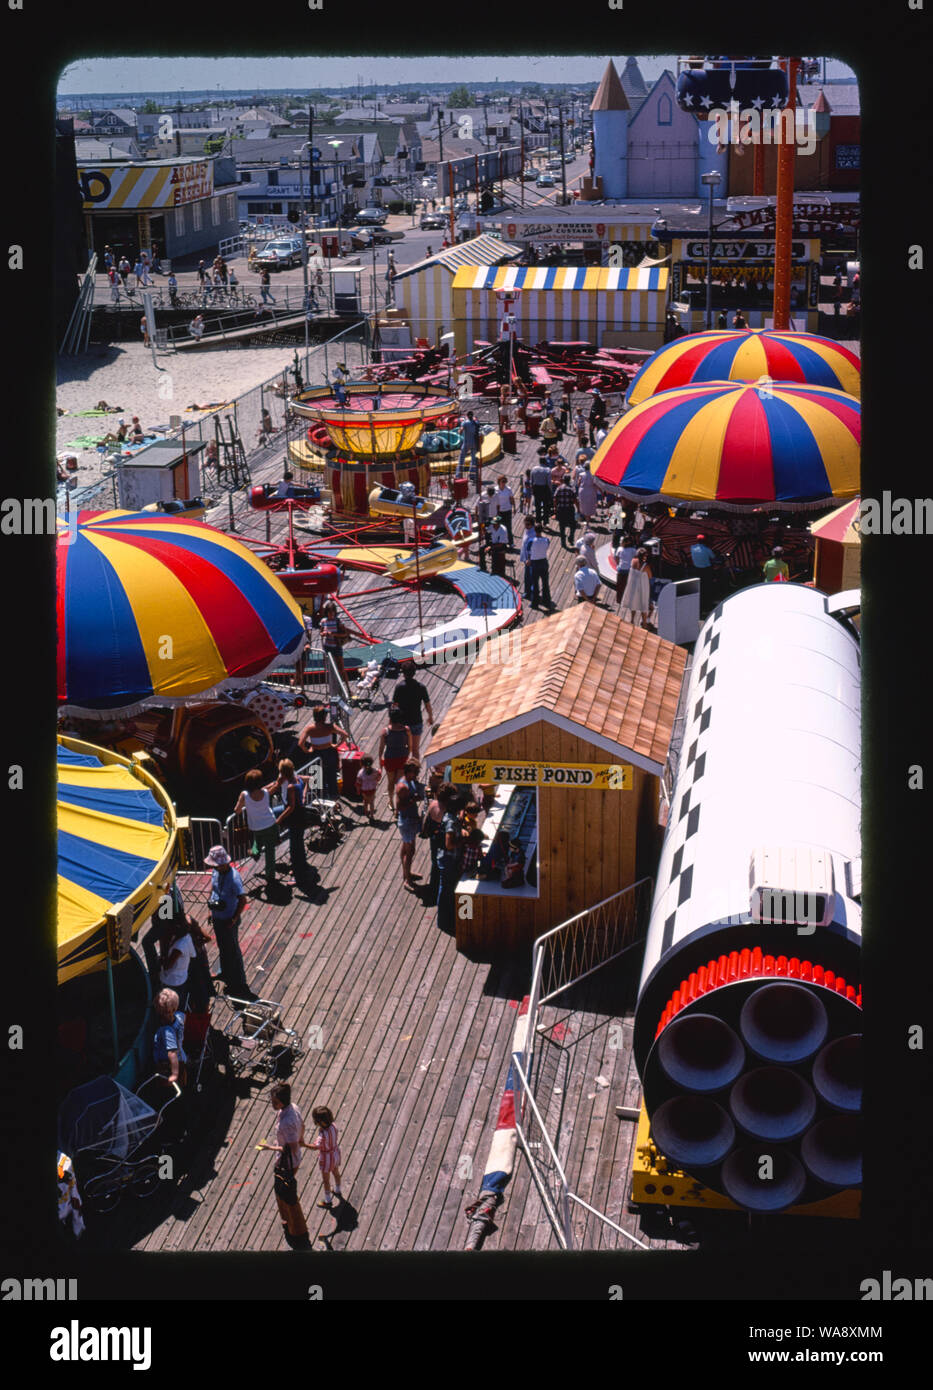 Casino Pier above kid's rides, Seaside Heights, New Jersey Stock Photo